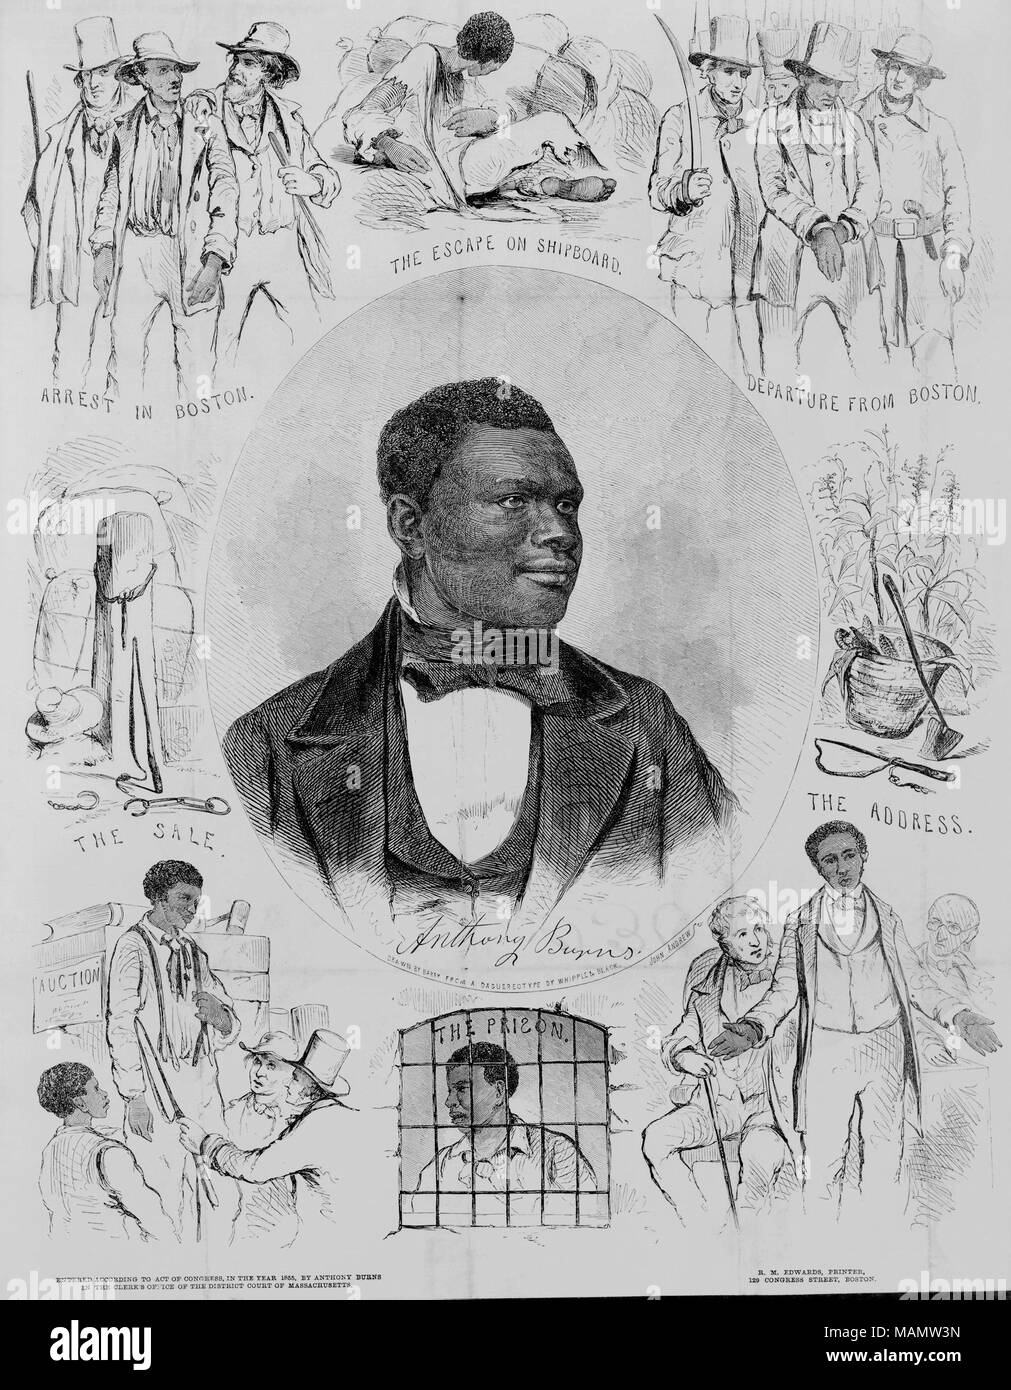 A portrait of the fugitive slave Anthony Burns, whose arrest and trial under the Fugitive Slave Act of 1850 touched off riots and protests by abolitionists and citizens of Boston in the spring of 1854. A bust portrait of the twenty-four-year-old Burns, 'Drawn by Barry from a daguereotype [sic] by Whipple and Black,' is surrounded by scenes from his life. These include (clockwise from lower left): the sale of the youthful Burns at auction, a whipping post with bales of cotton, his arrest in Boston on May 24, 1854, his escape from Richmond on shipboard, his departure from Boston escorted by fede Stock Photo